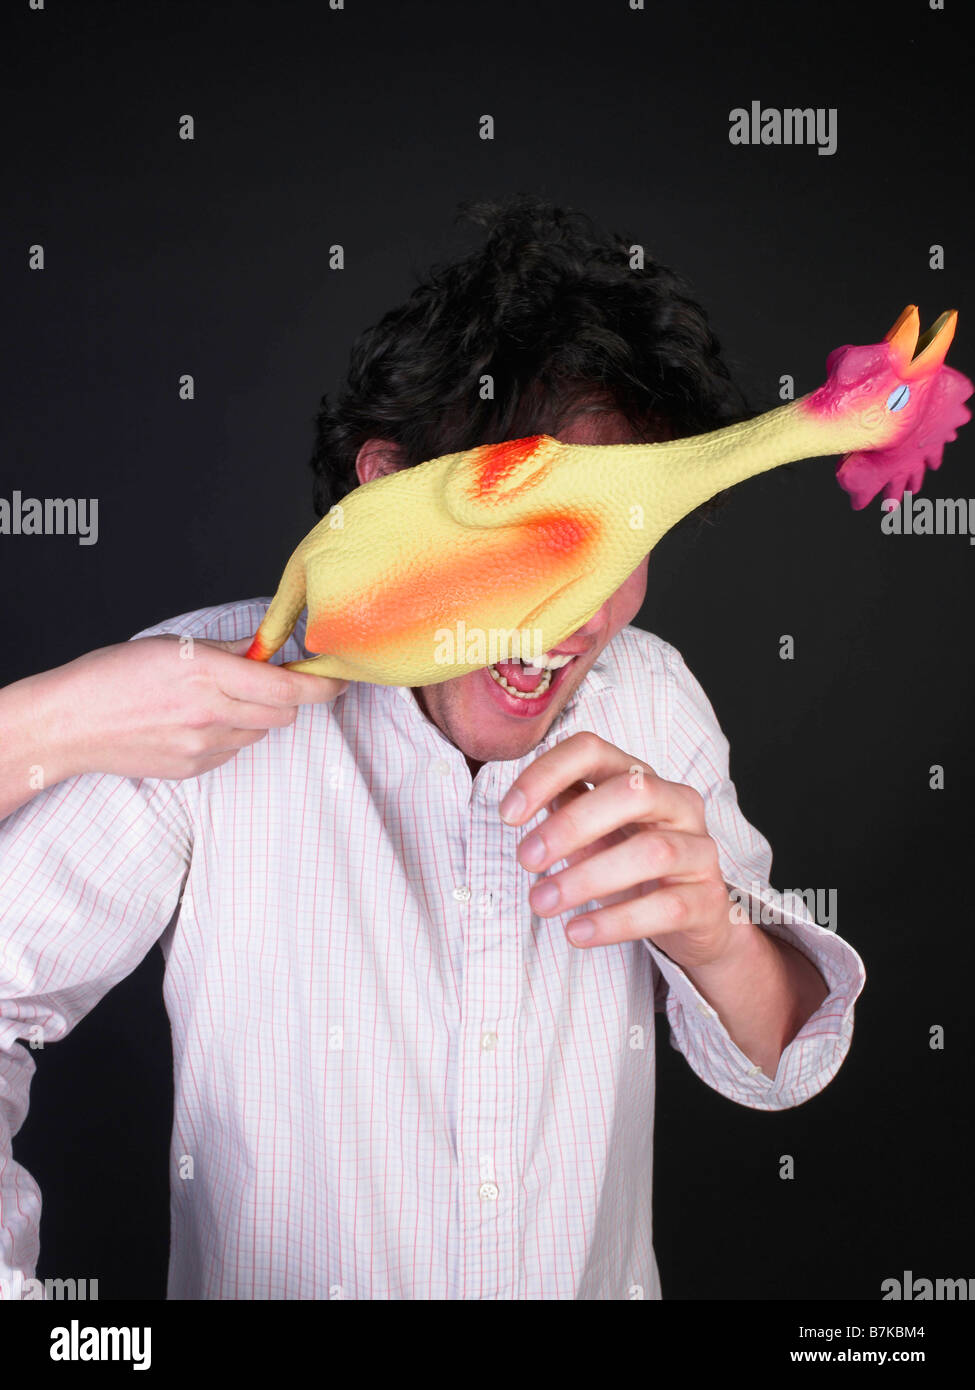 man getting hit with rubber chicken Stock Photo